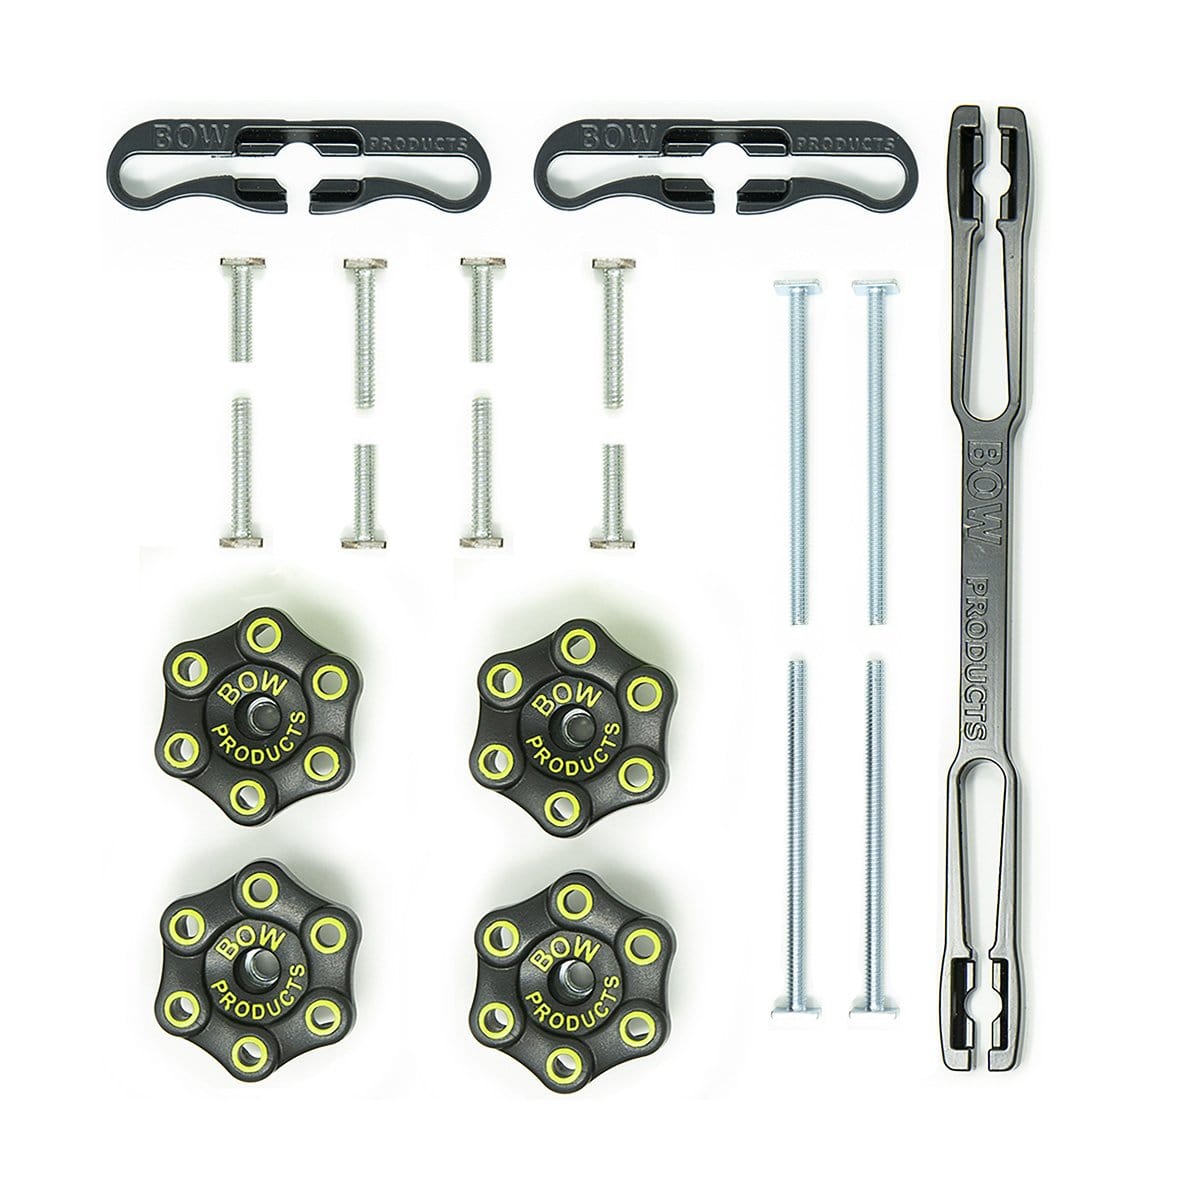 Bow Products AP3 Jigs and Fixtures AnchorPRO Combo 3/4” Miter Bar Kit